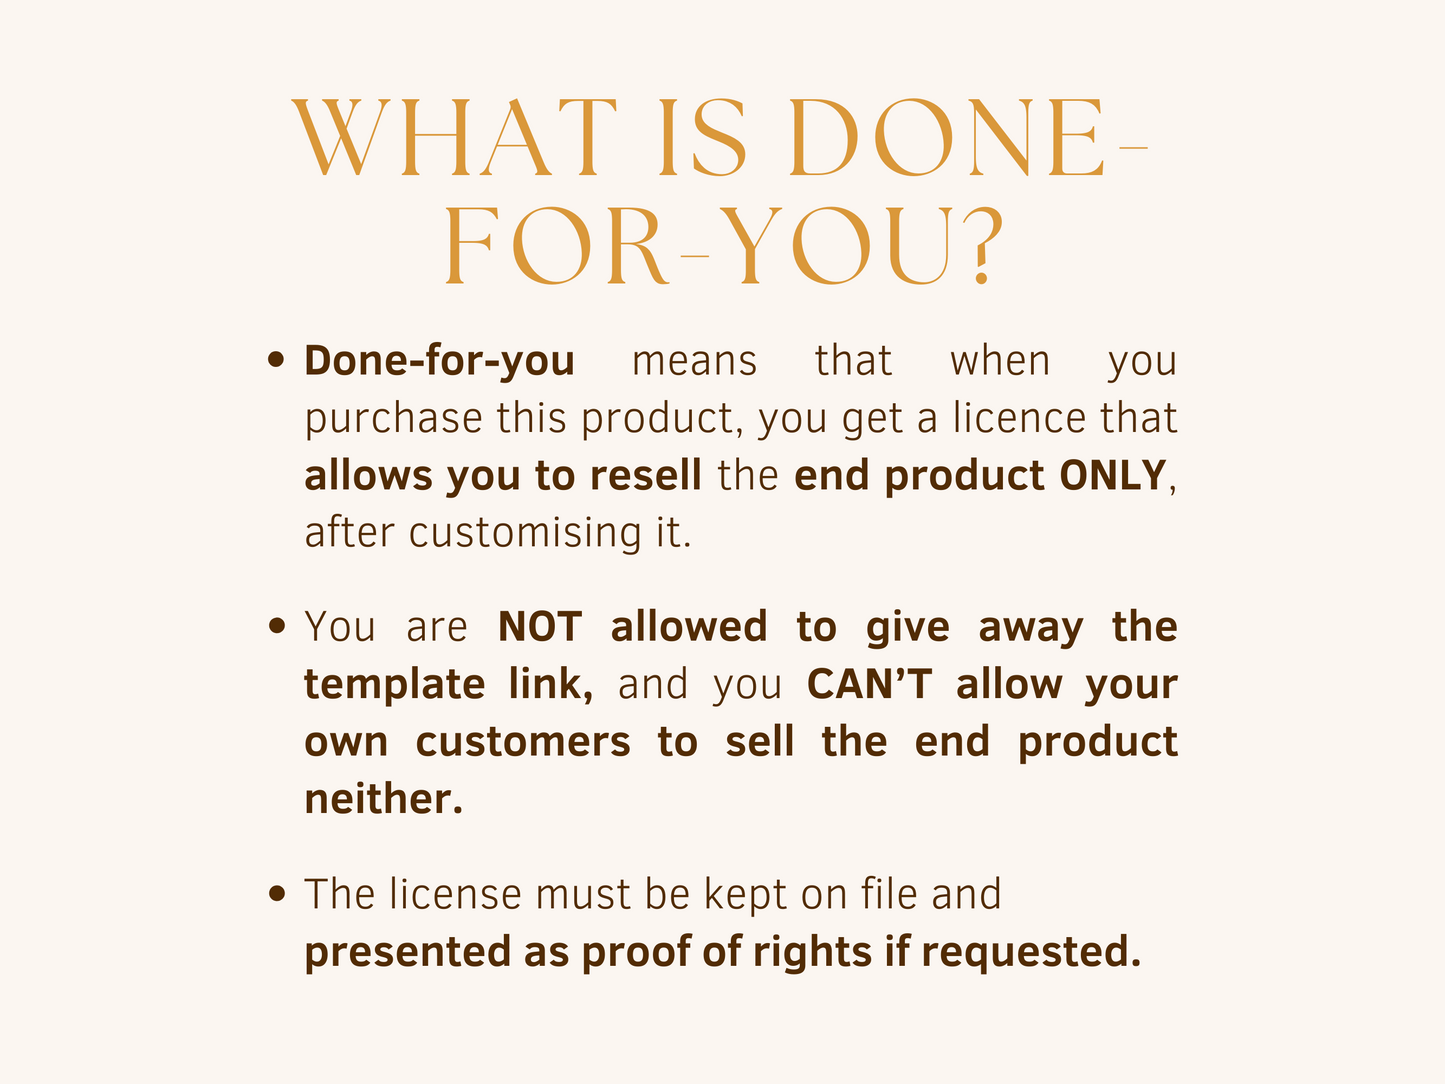 What is done-for-you? Done-for-you products allow you to resell the end product only, after customizing it. You are not allowed to give away the template link, and you can't allow your own customers to sell the end product neither. The license must be kept on file and presented as proof of rights if requested.